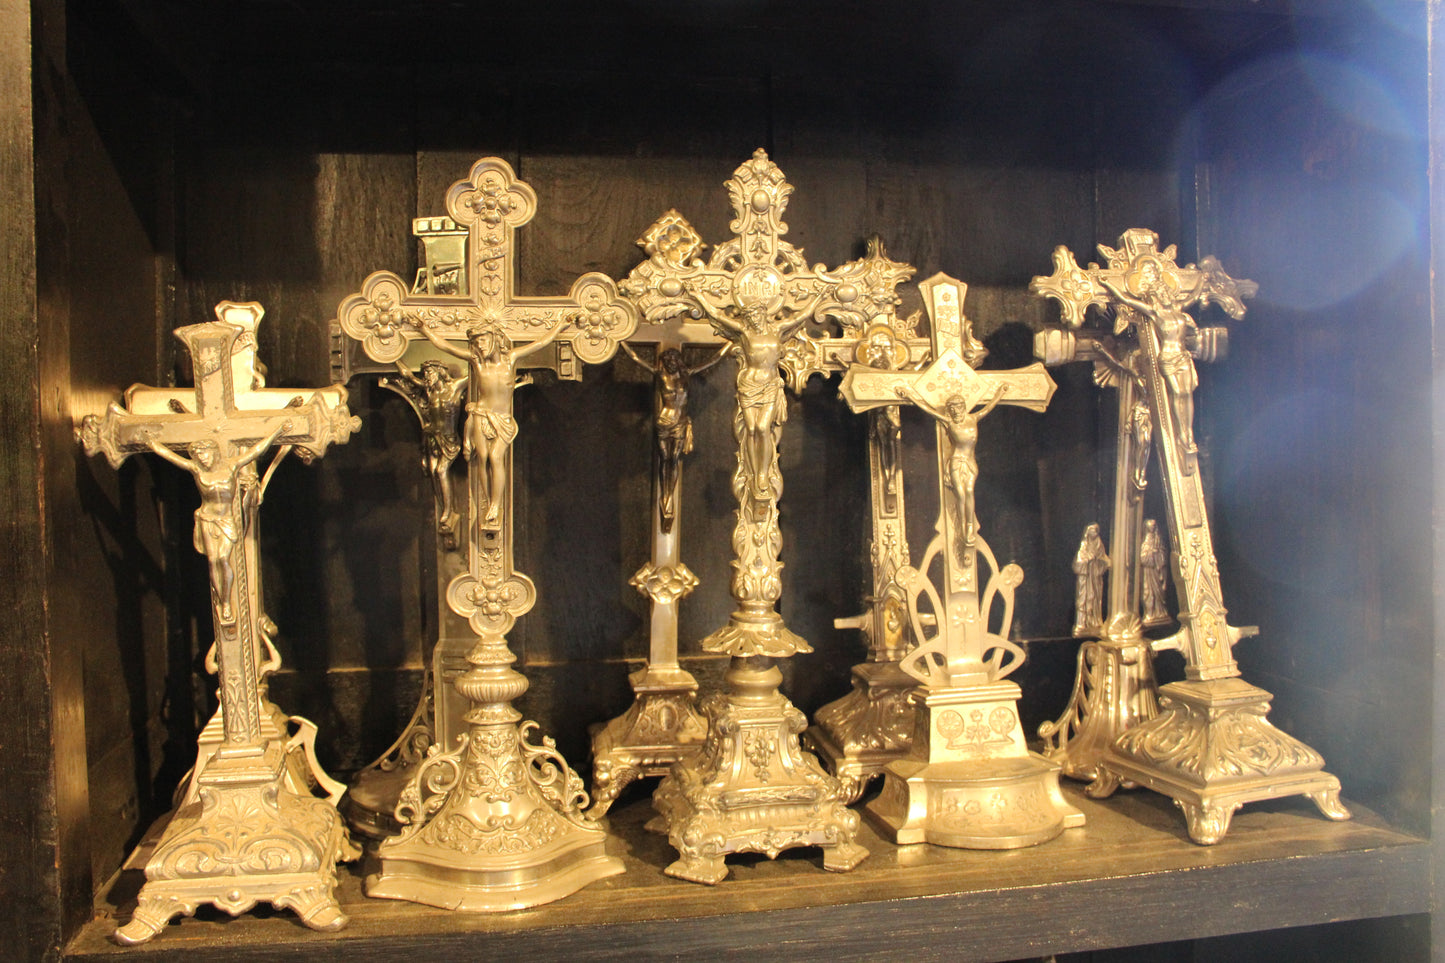 Silvertoned Religion Crucifix from Europe, Spirituality and Religion, Crucifixes and Crosses